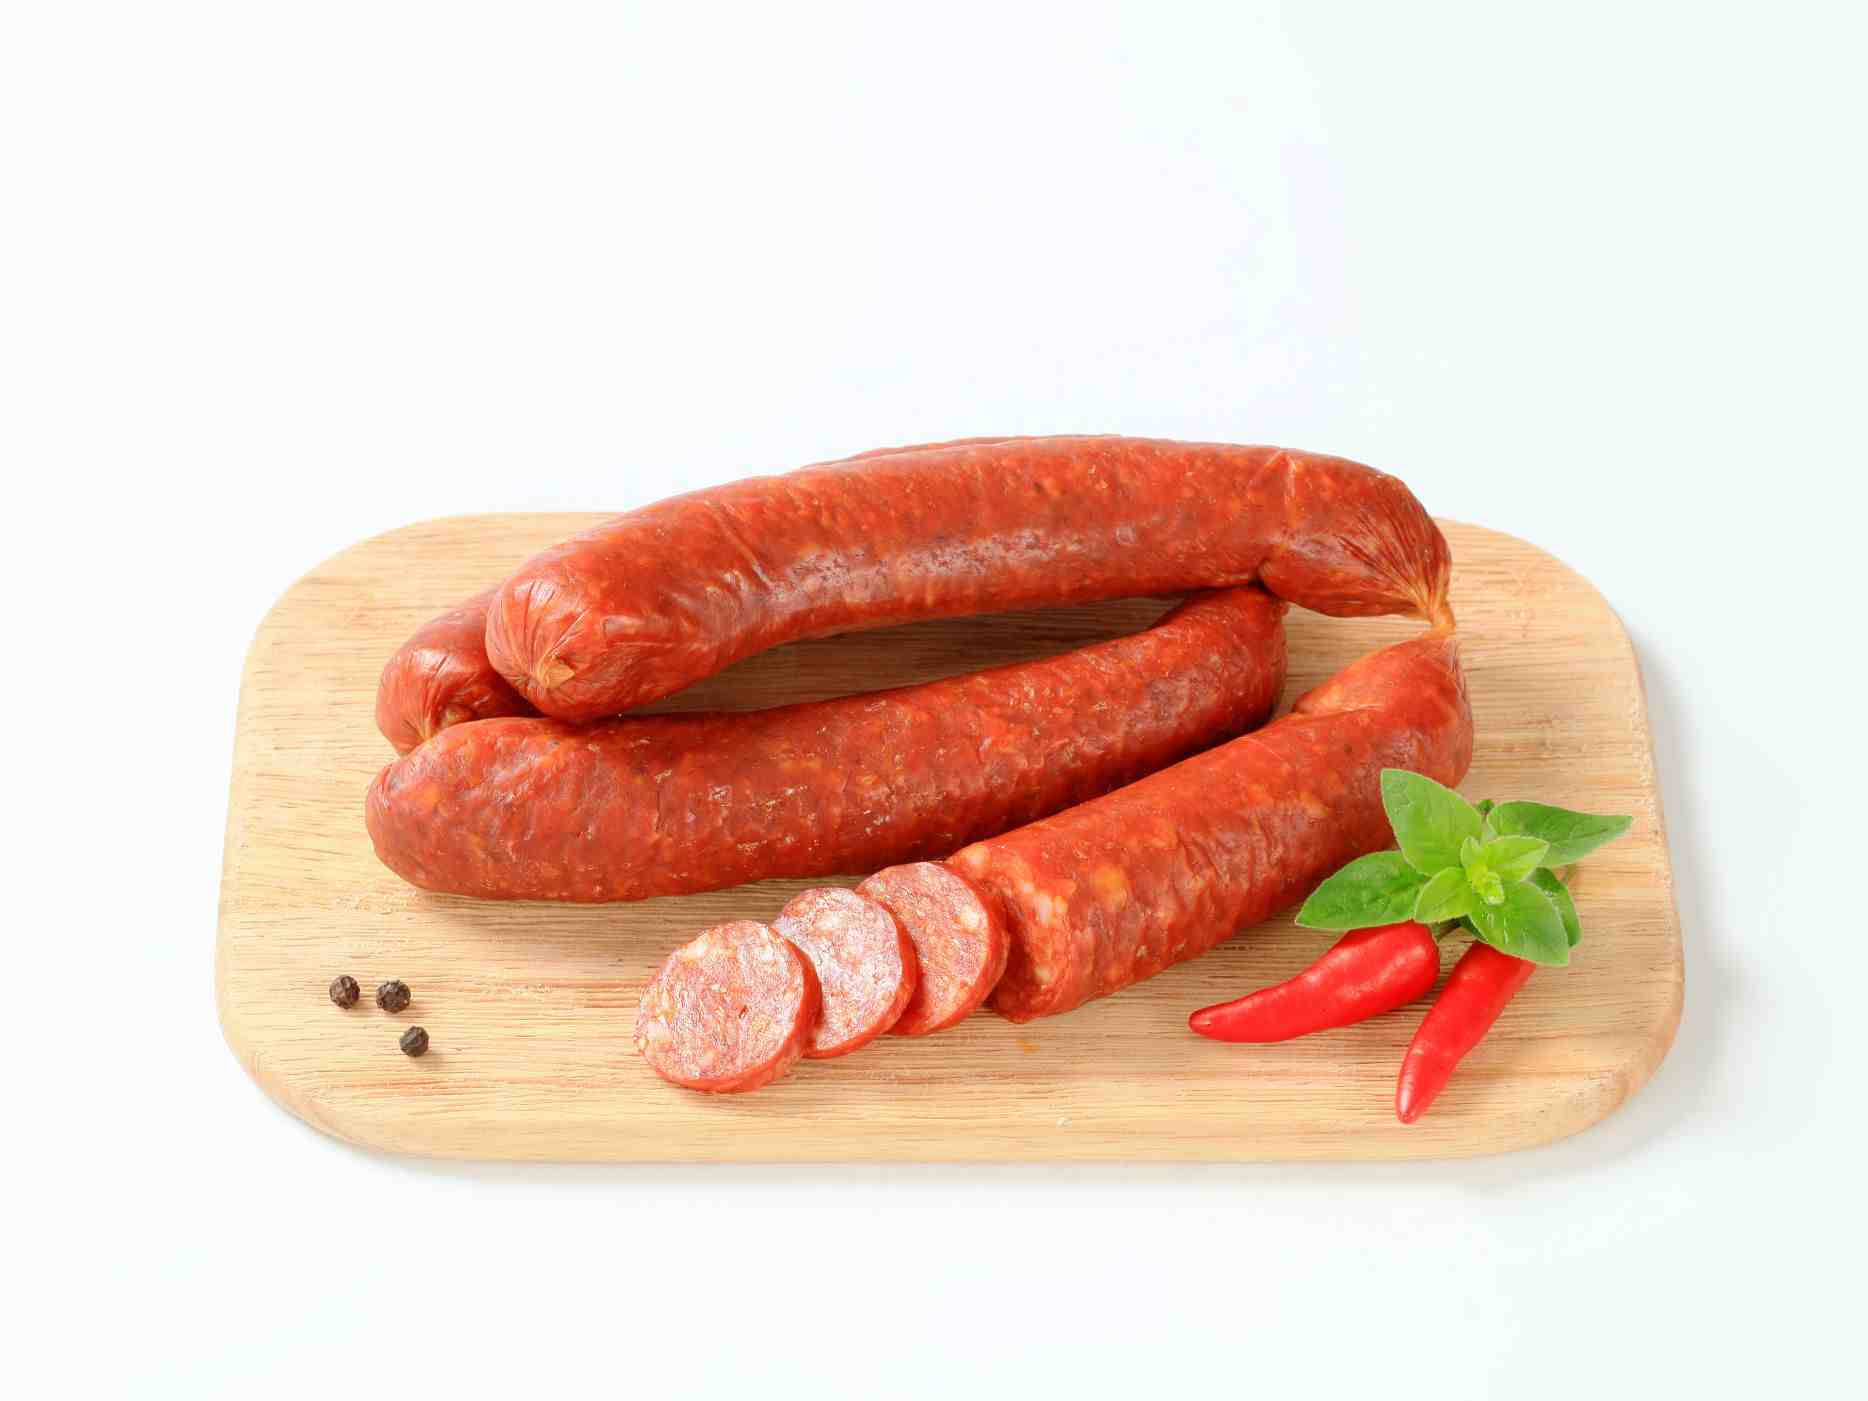 What is the difference between kielbasa and regular sausage?